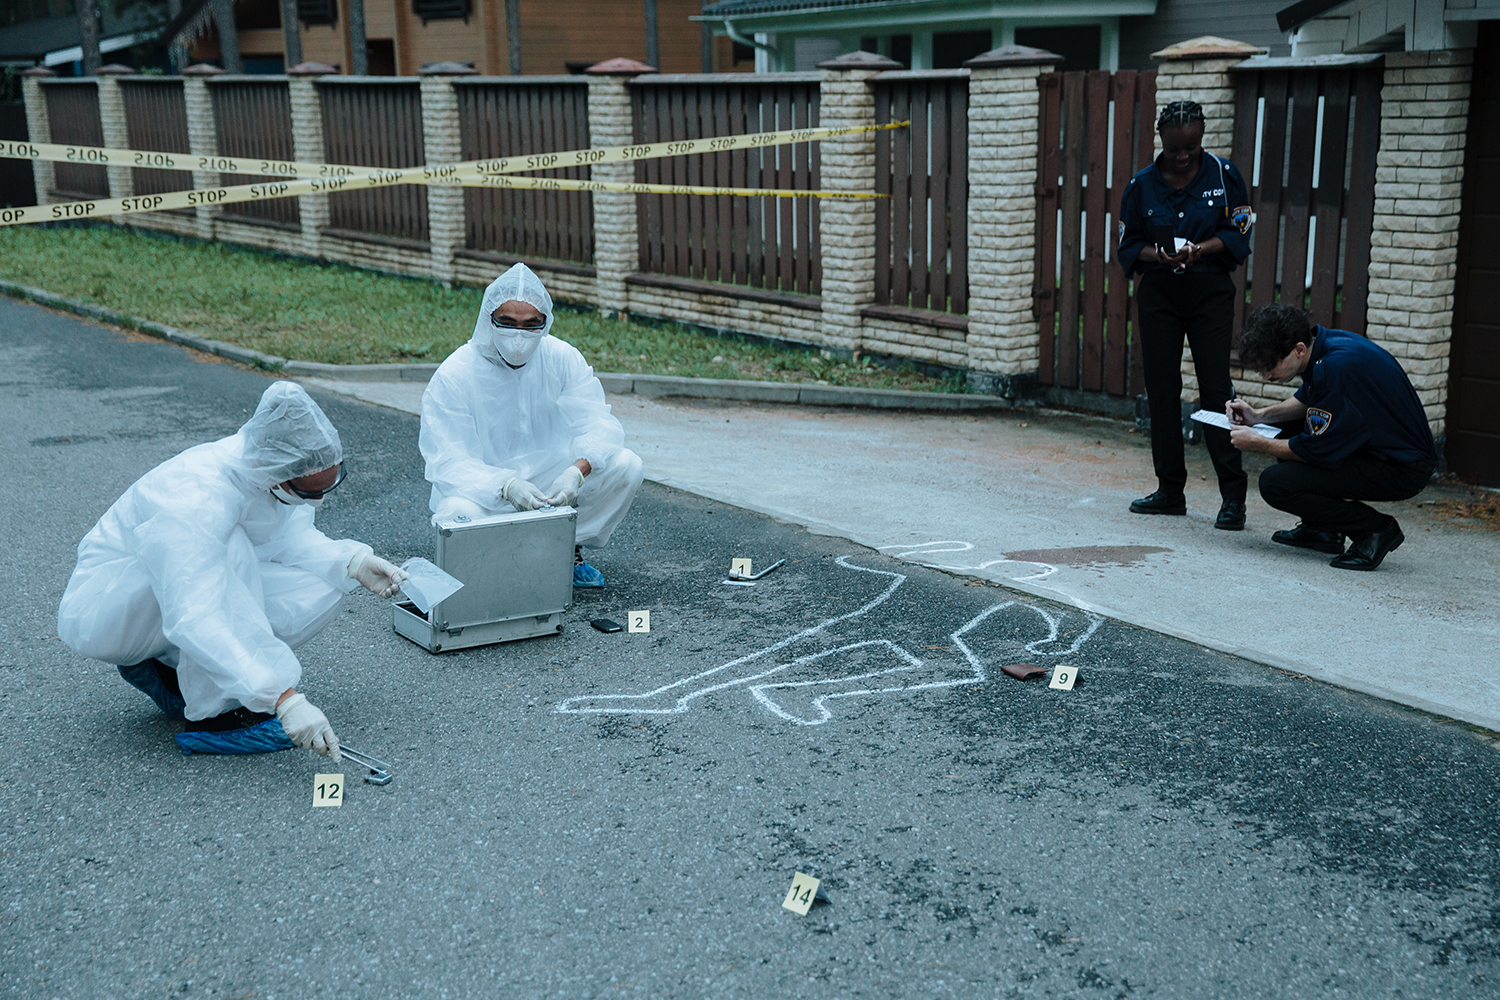 An image showing a couple of forensic analysts on a crime scene.